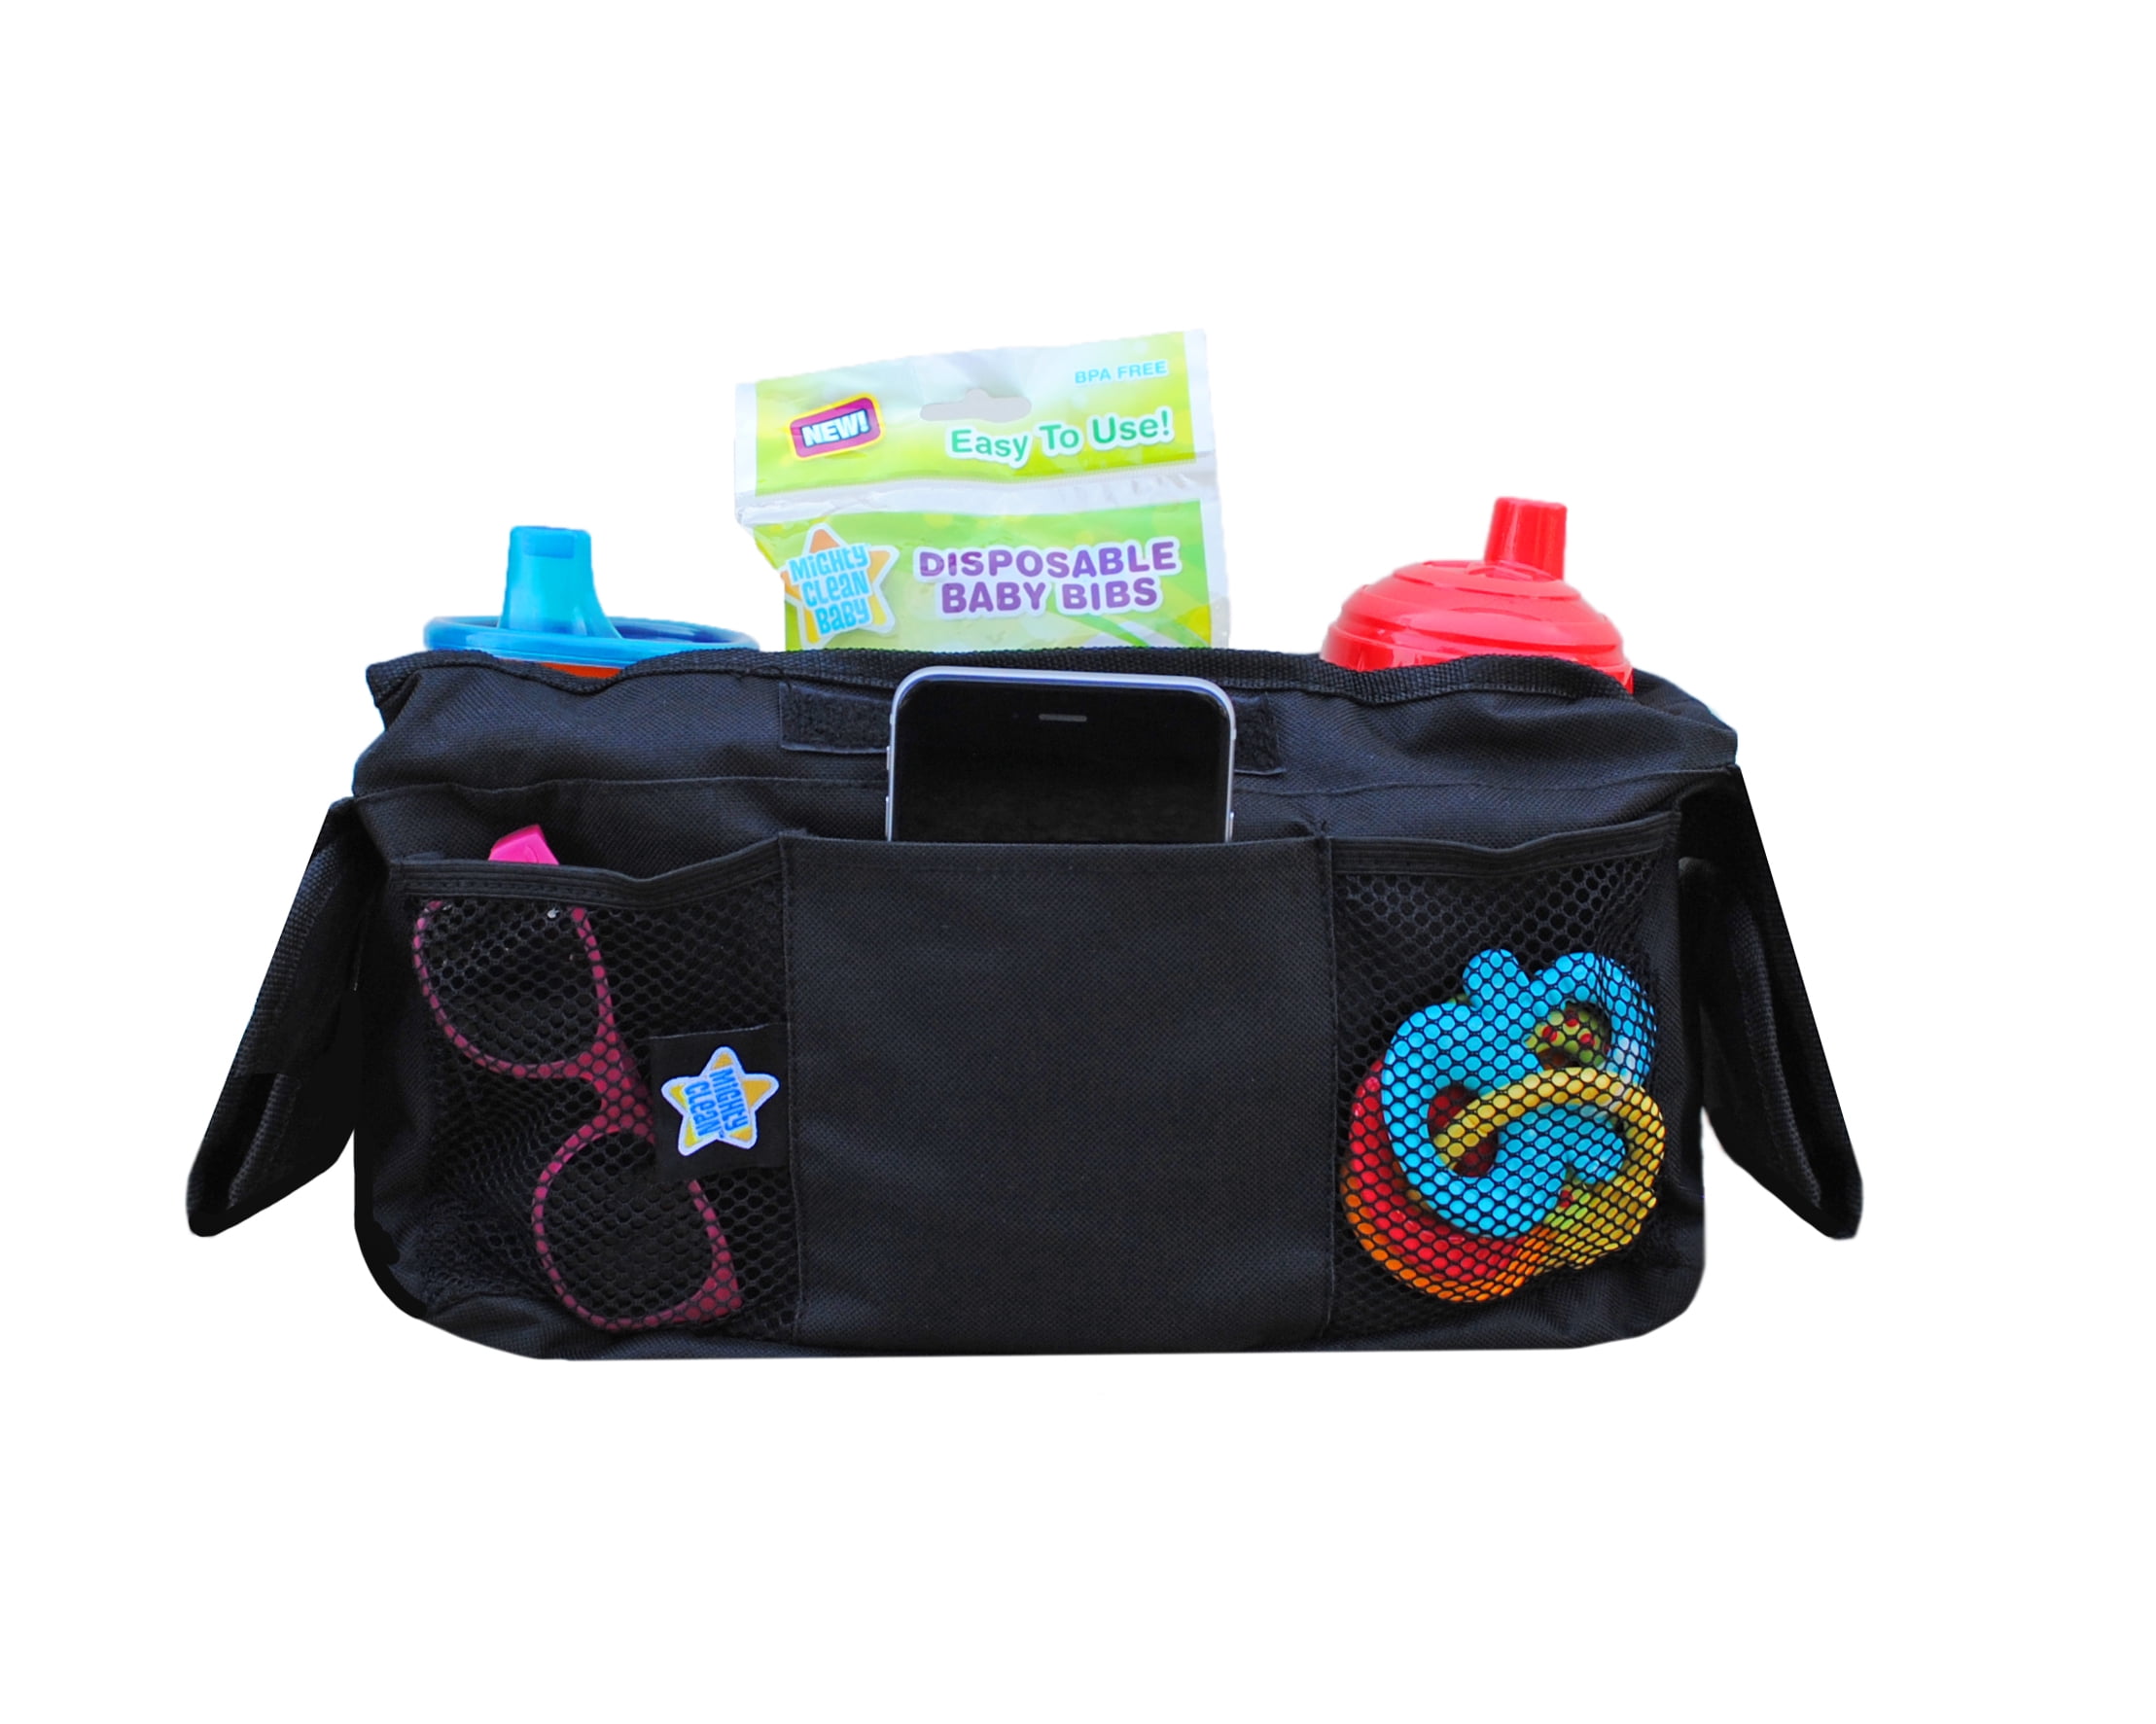 Les yeu Baby Stroller Organizer Bag,Universal Stroller Organizer with Insulated Cup Holder for Universal Stroller Like Baby Jogger 8.3x4.8x4.8in 